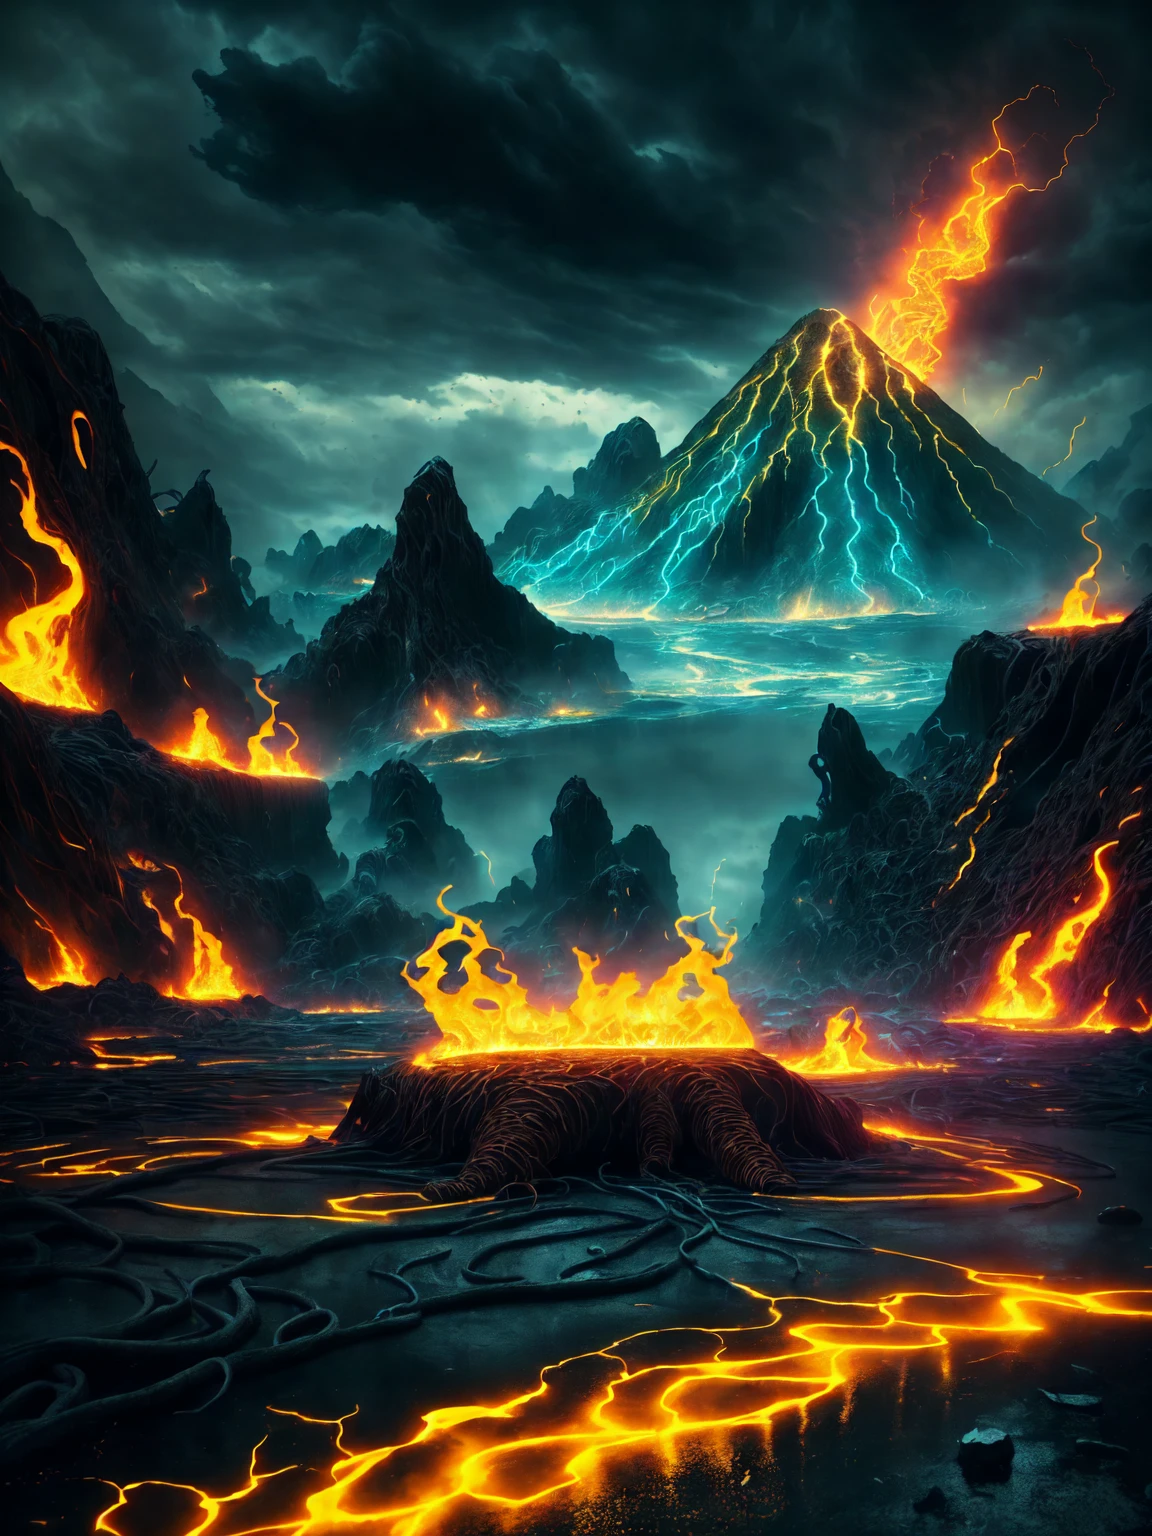 (high quality:1.2),demonic creature emerging from a volcano, an awe-inspiring image, destruction, apocalyptic, HD 4k,8k, masterpiece, ultra-detailed, hyper-realistic, lava melting everything, intense heat, glowing embers, dark and ominous atmosphere, billowing black smoke, molten rocks flying in the air, fiery explosions, crumbling buildings, devastated landscape, surreal and terrifying, vibrant and vivid colors, dramatic lighting, sparks and flames dancing around the creature, the ground cracking and splitting, chaos and despair, a haunting masterpiece in high definition.